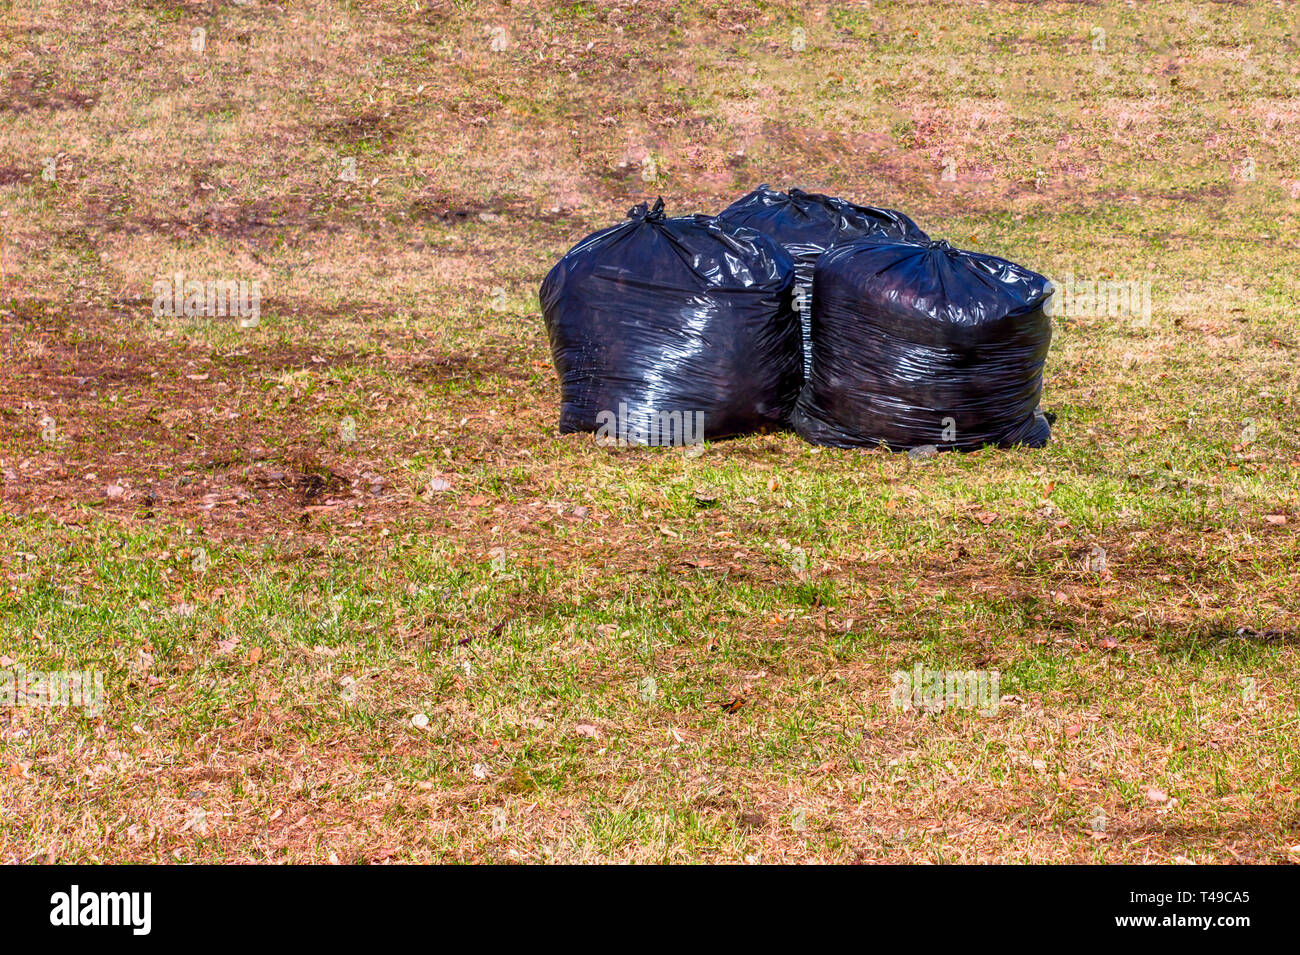 https://c8.alamy.com/comp/T49CA5/black-plastic-bags-with-last-years-dry-leaves-on-the-lawn-in-the-park-T49CA5.jpg